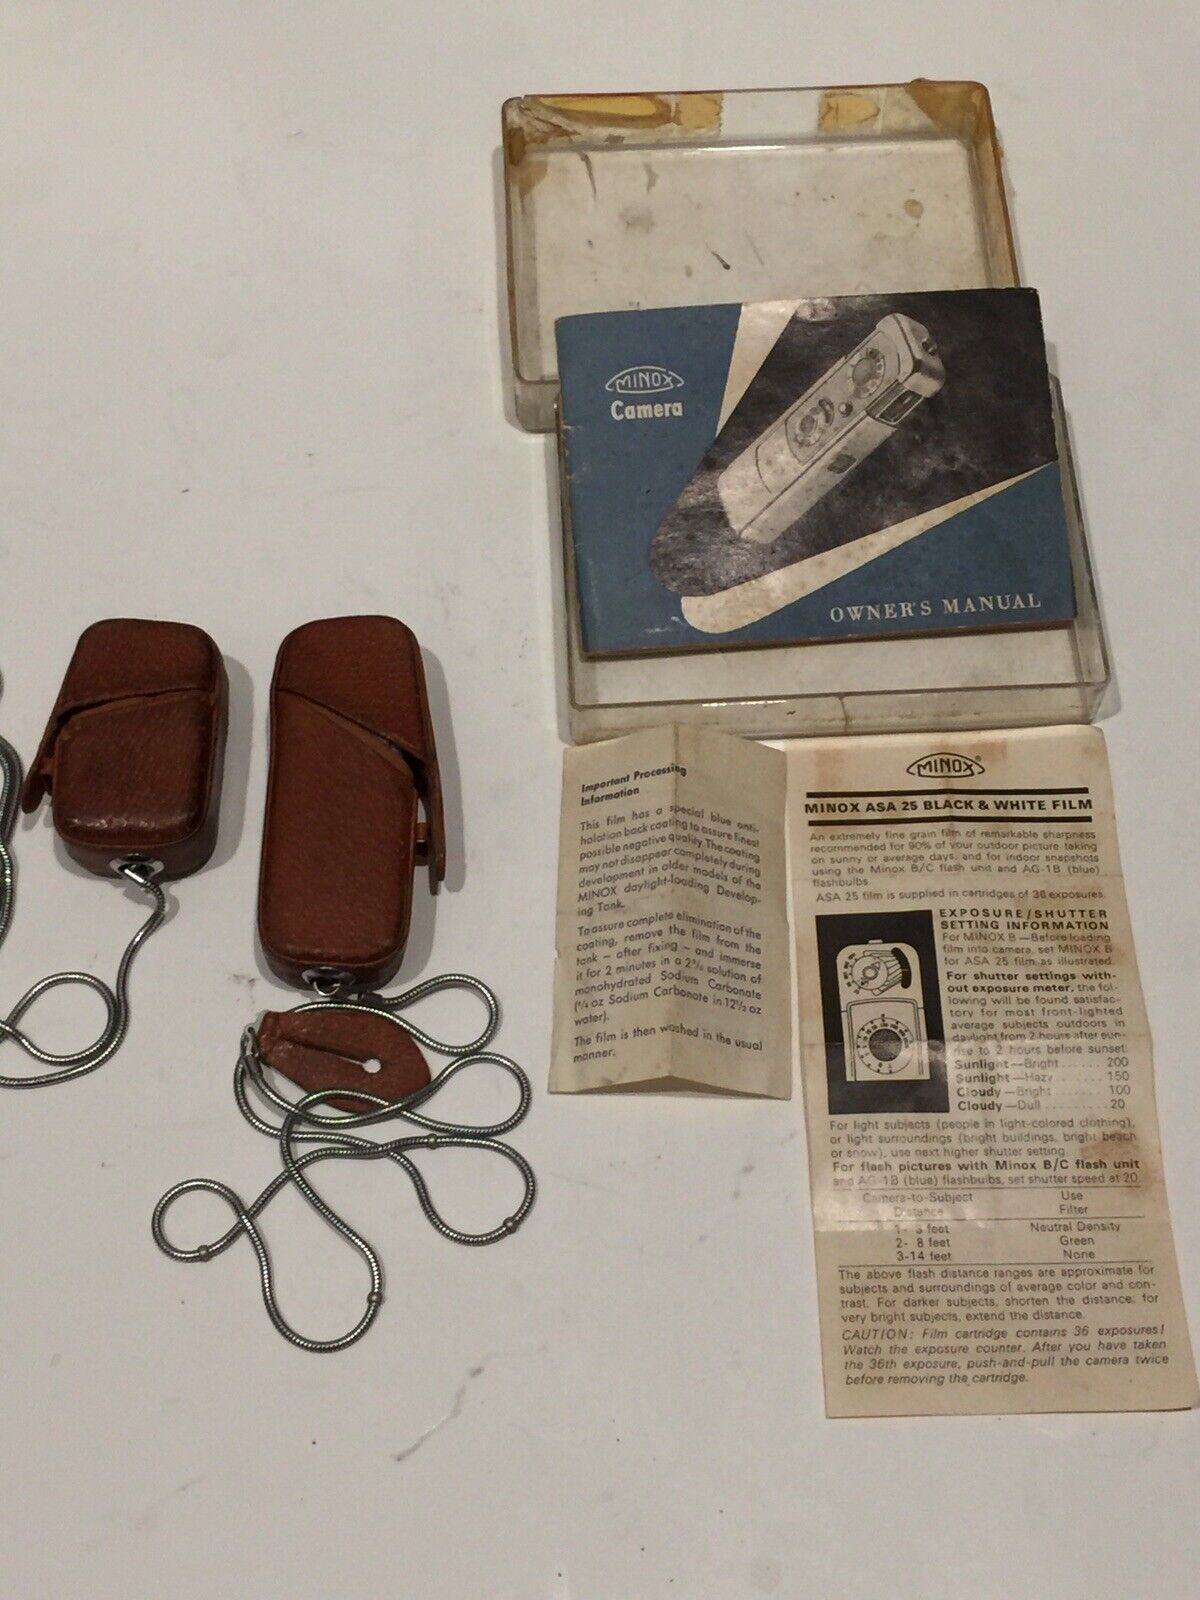 Today's Financial sales sale only Minox and light exposure meter with leather Wit cases rare Brown